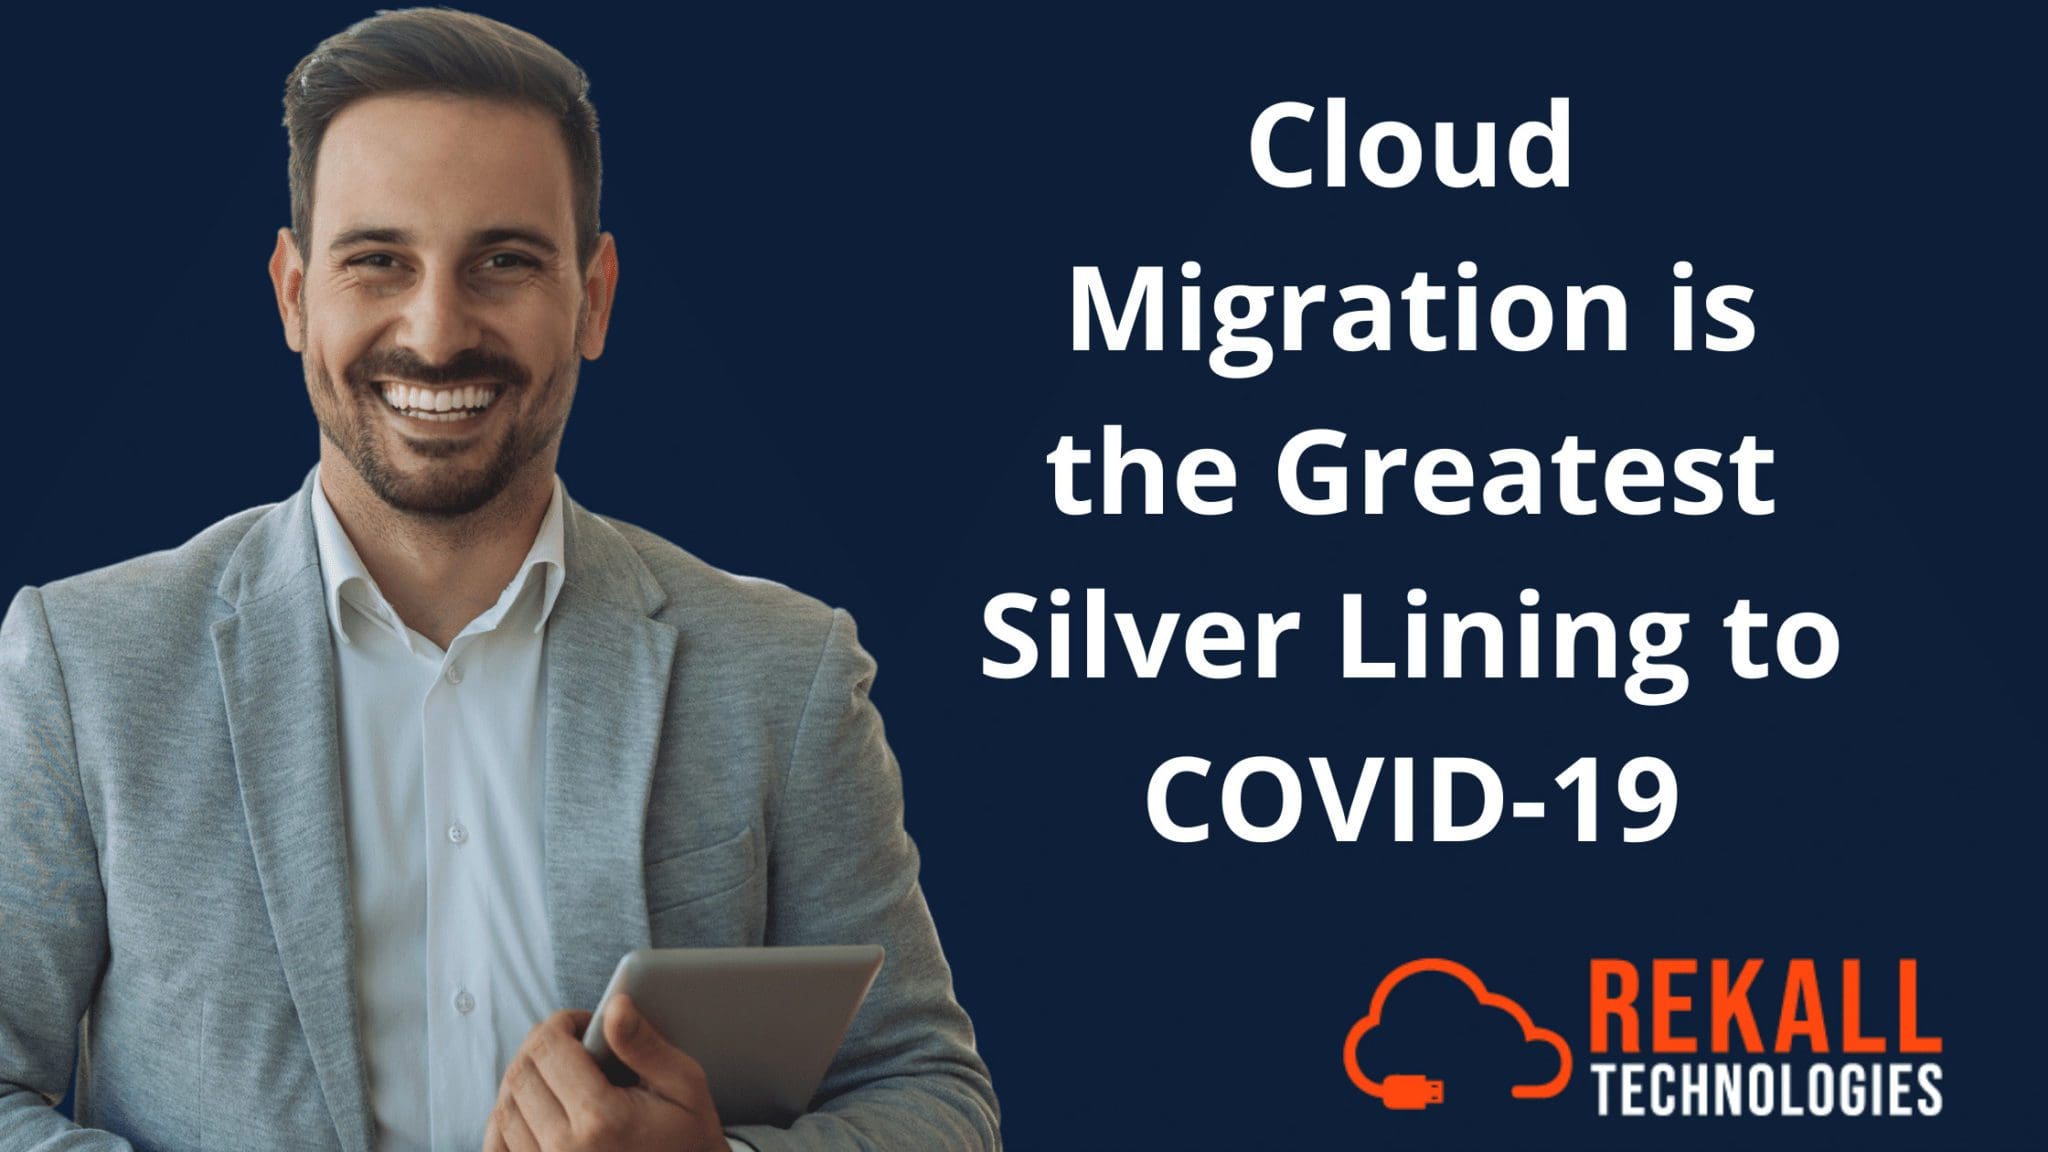 Cloud Migration is the Greatest Silver Lining to COVID-19